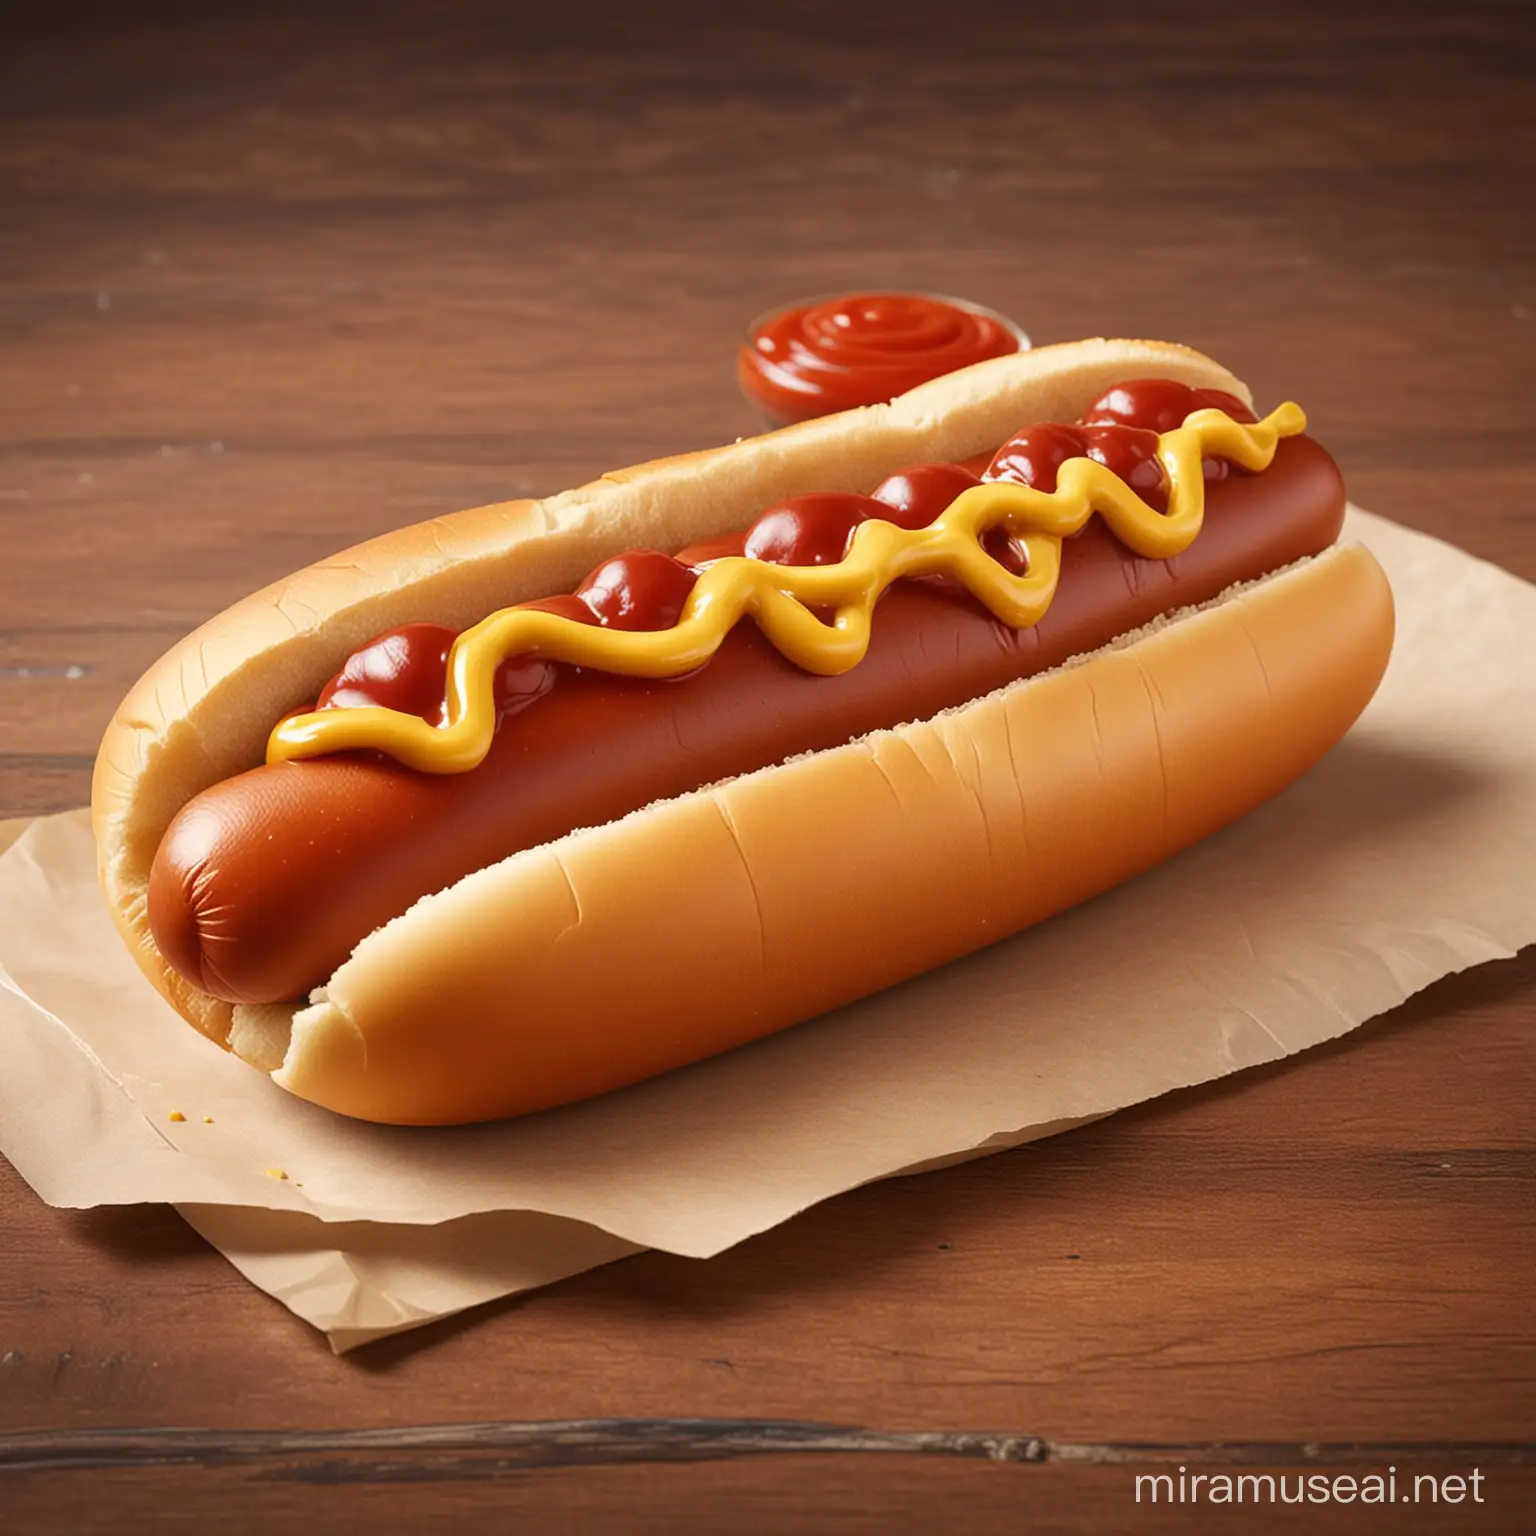 hot dog with red ketchup ,disney pixar style